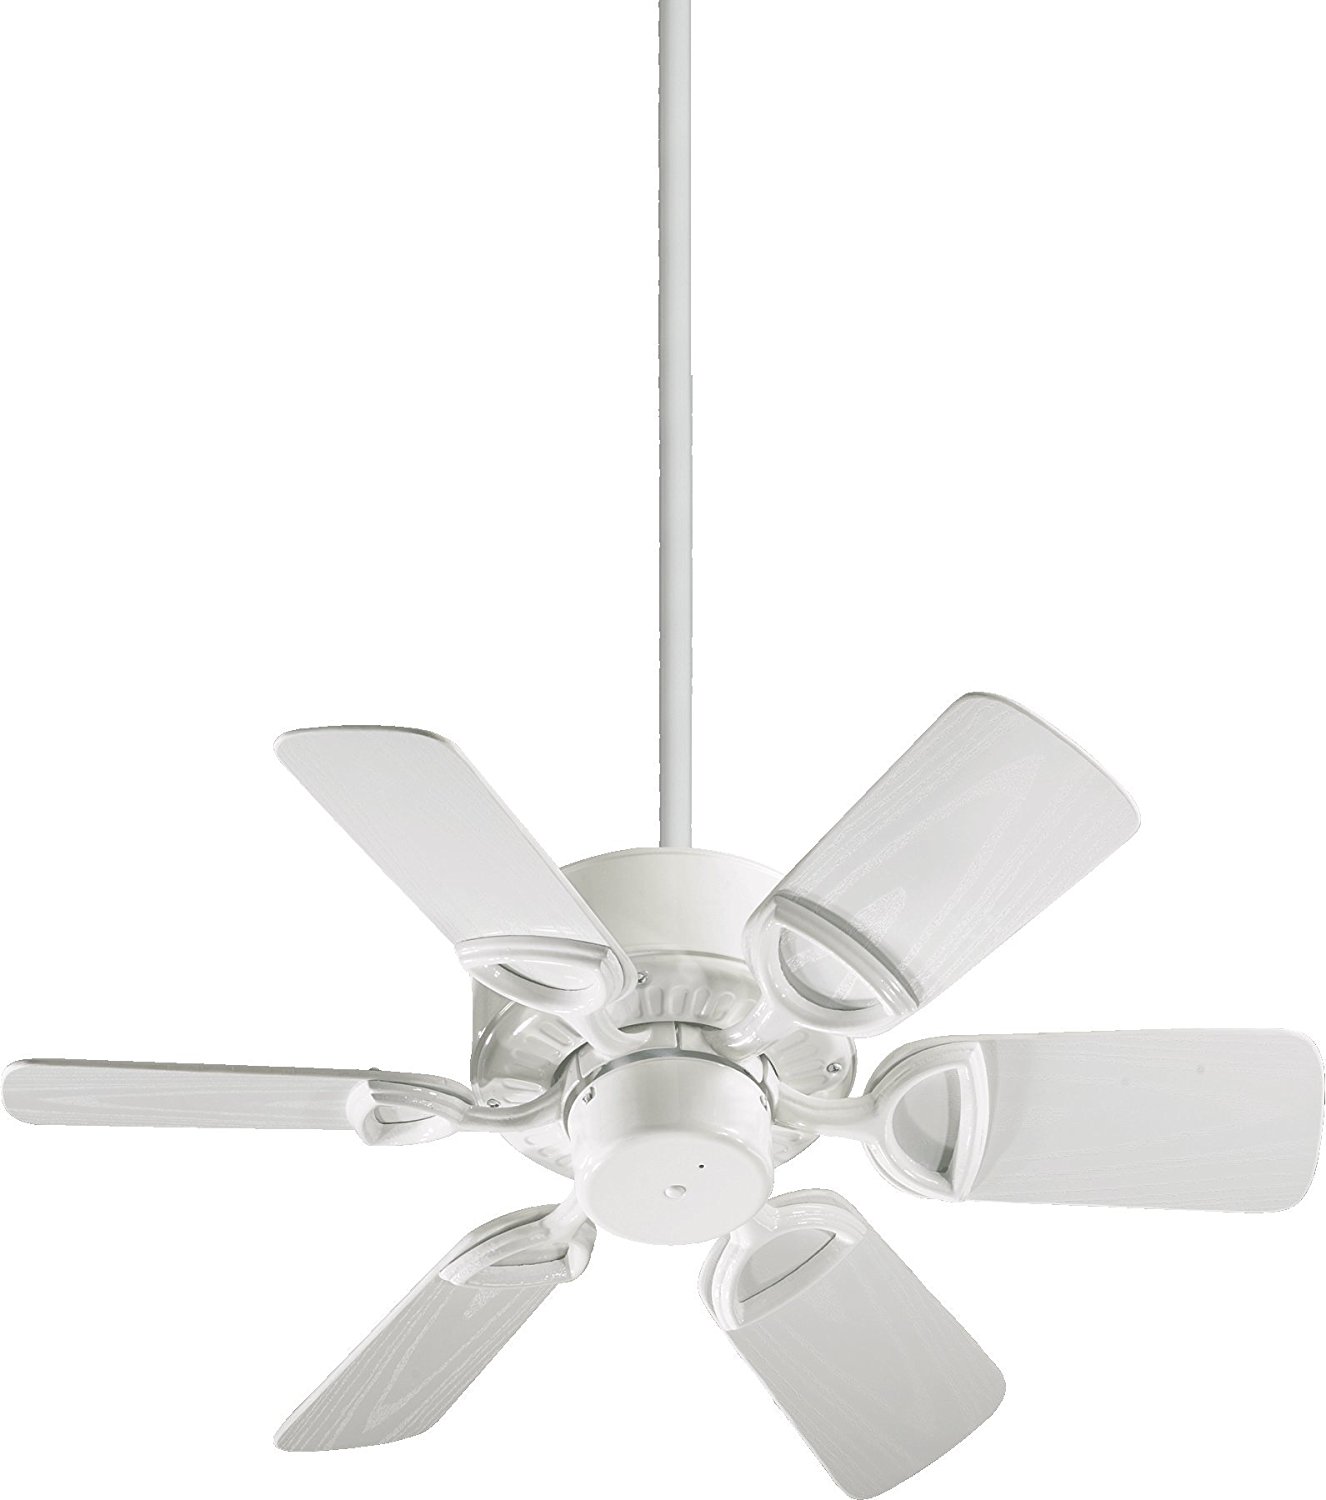 Quorum International 143306-6 Estate 6-Blade Patio Ceiling Fan with White ABS Blades, 30-Inch, Gloss White Finish